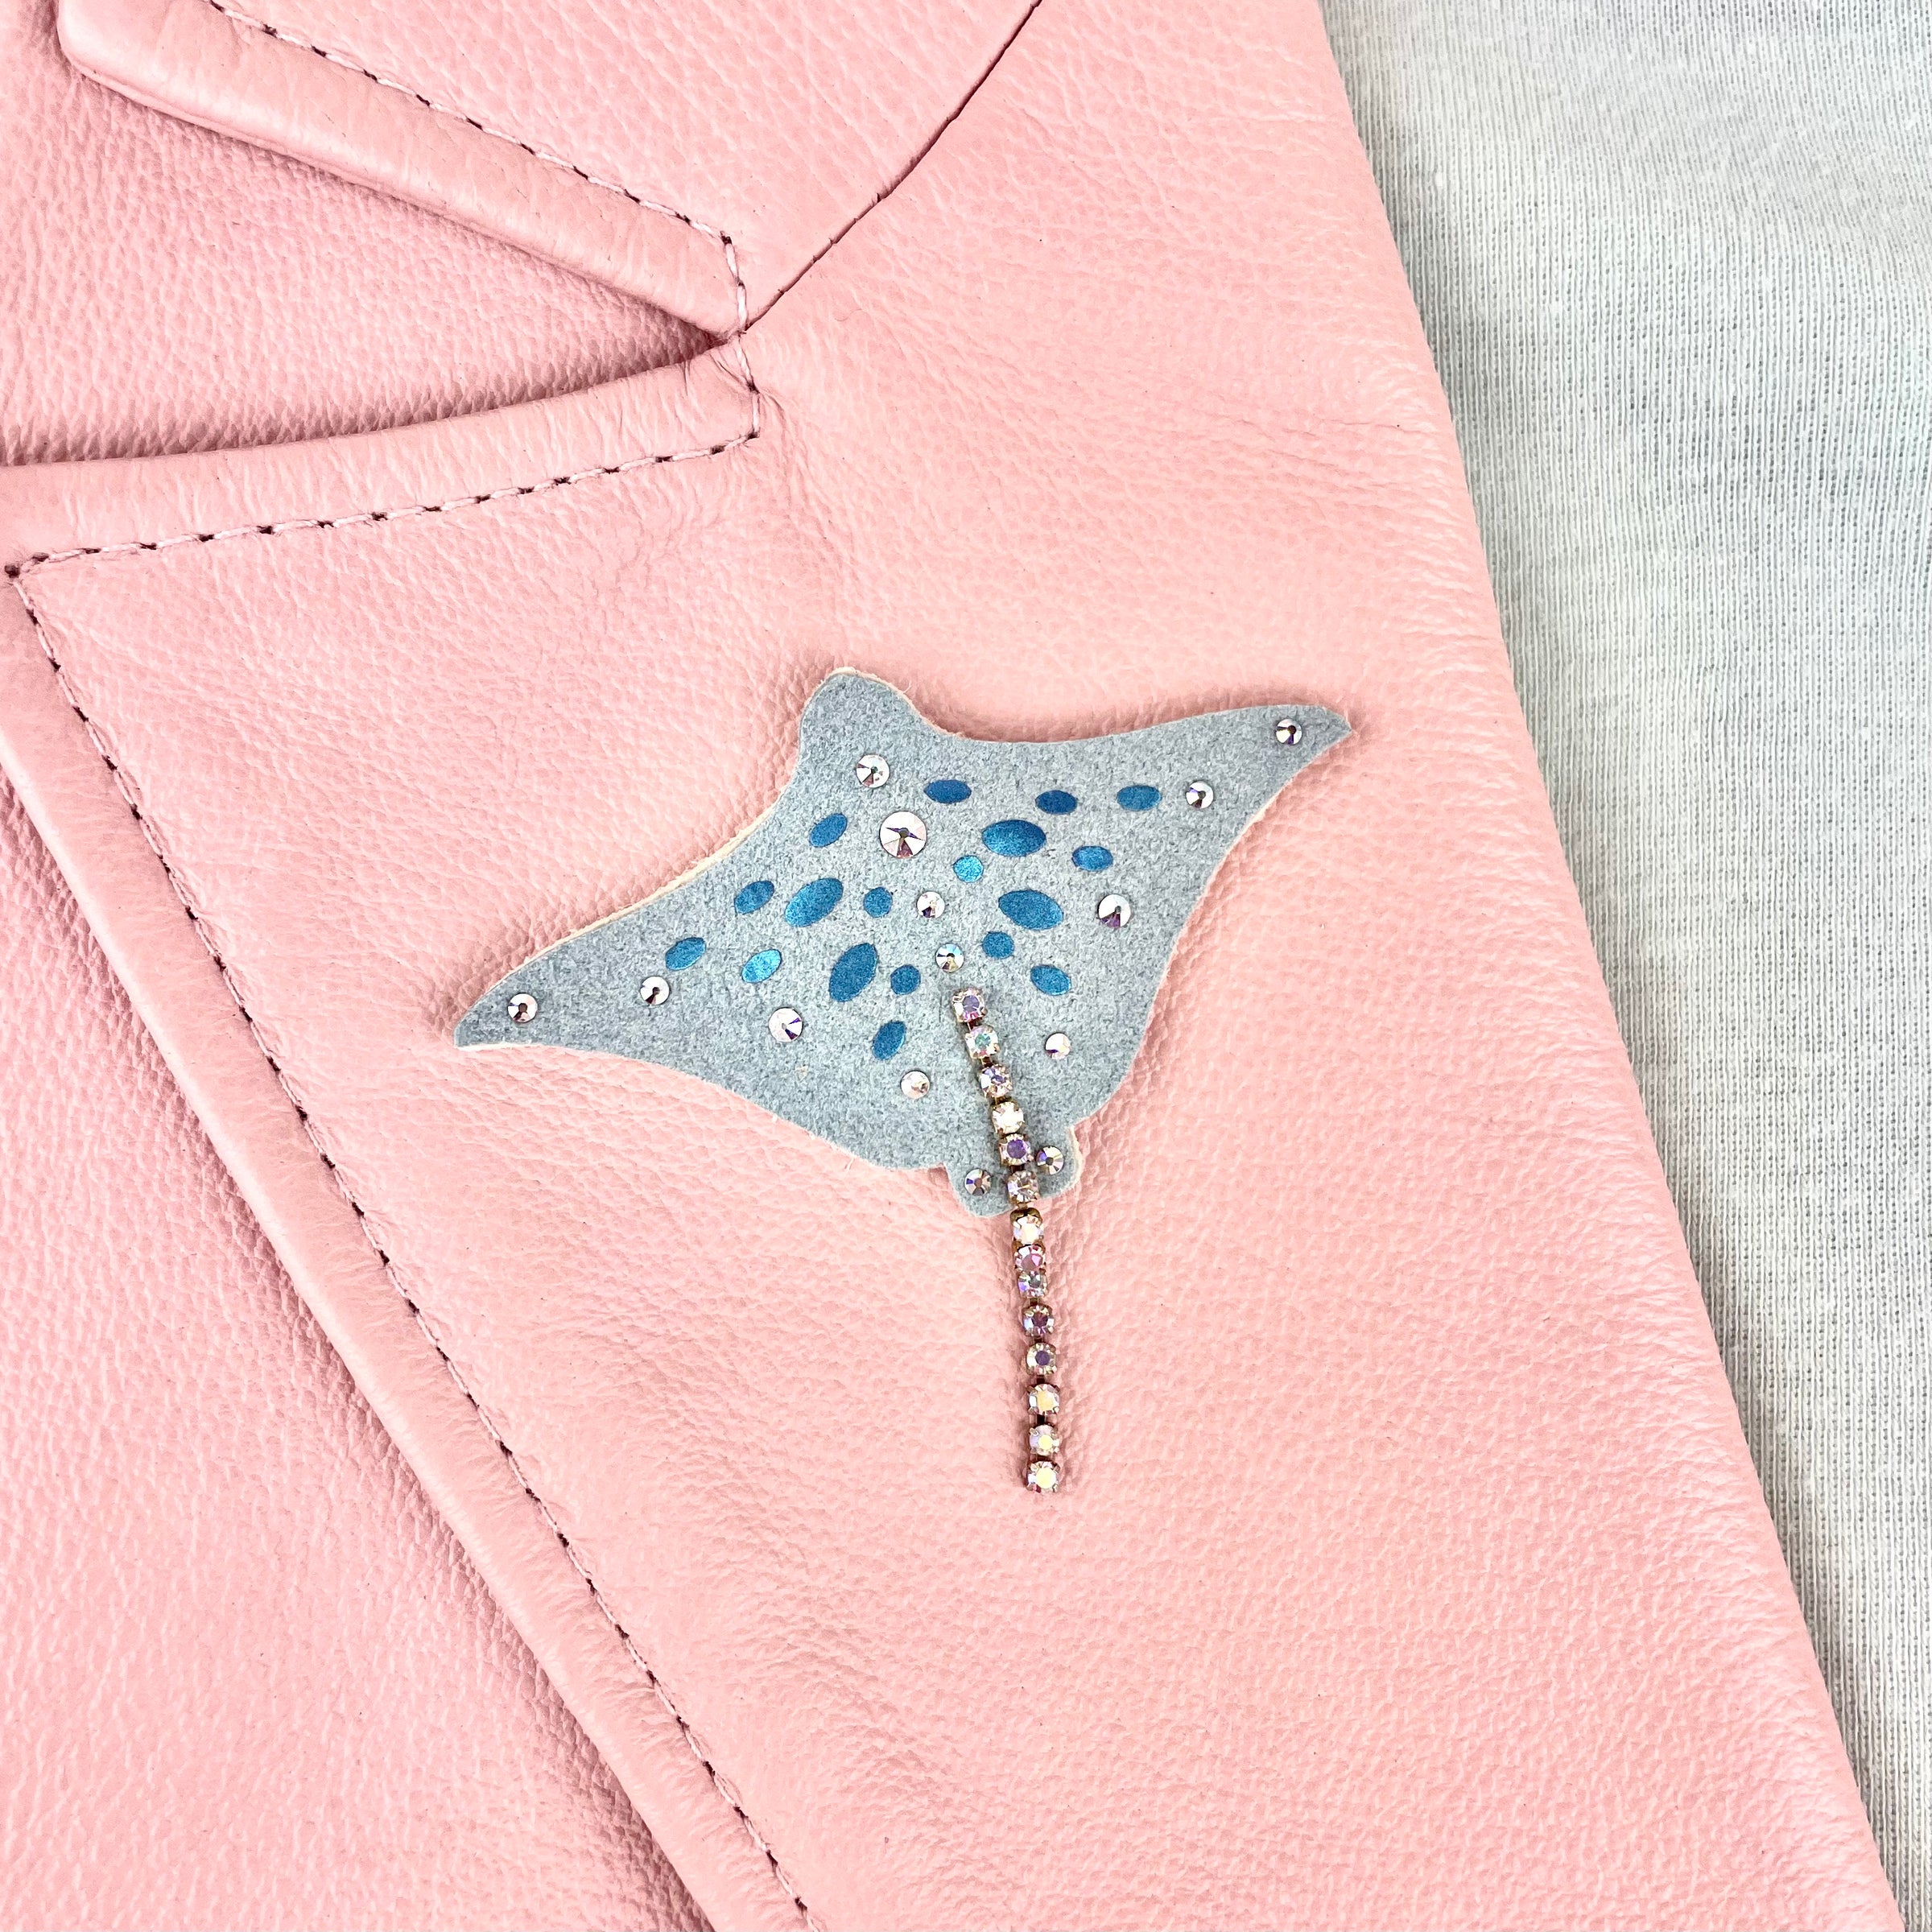 "Sting Ray (Dusty Blue)" - Magnetic Textile Pin